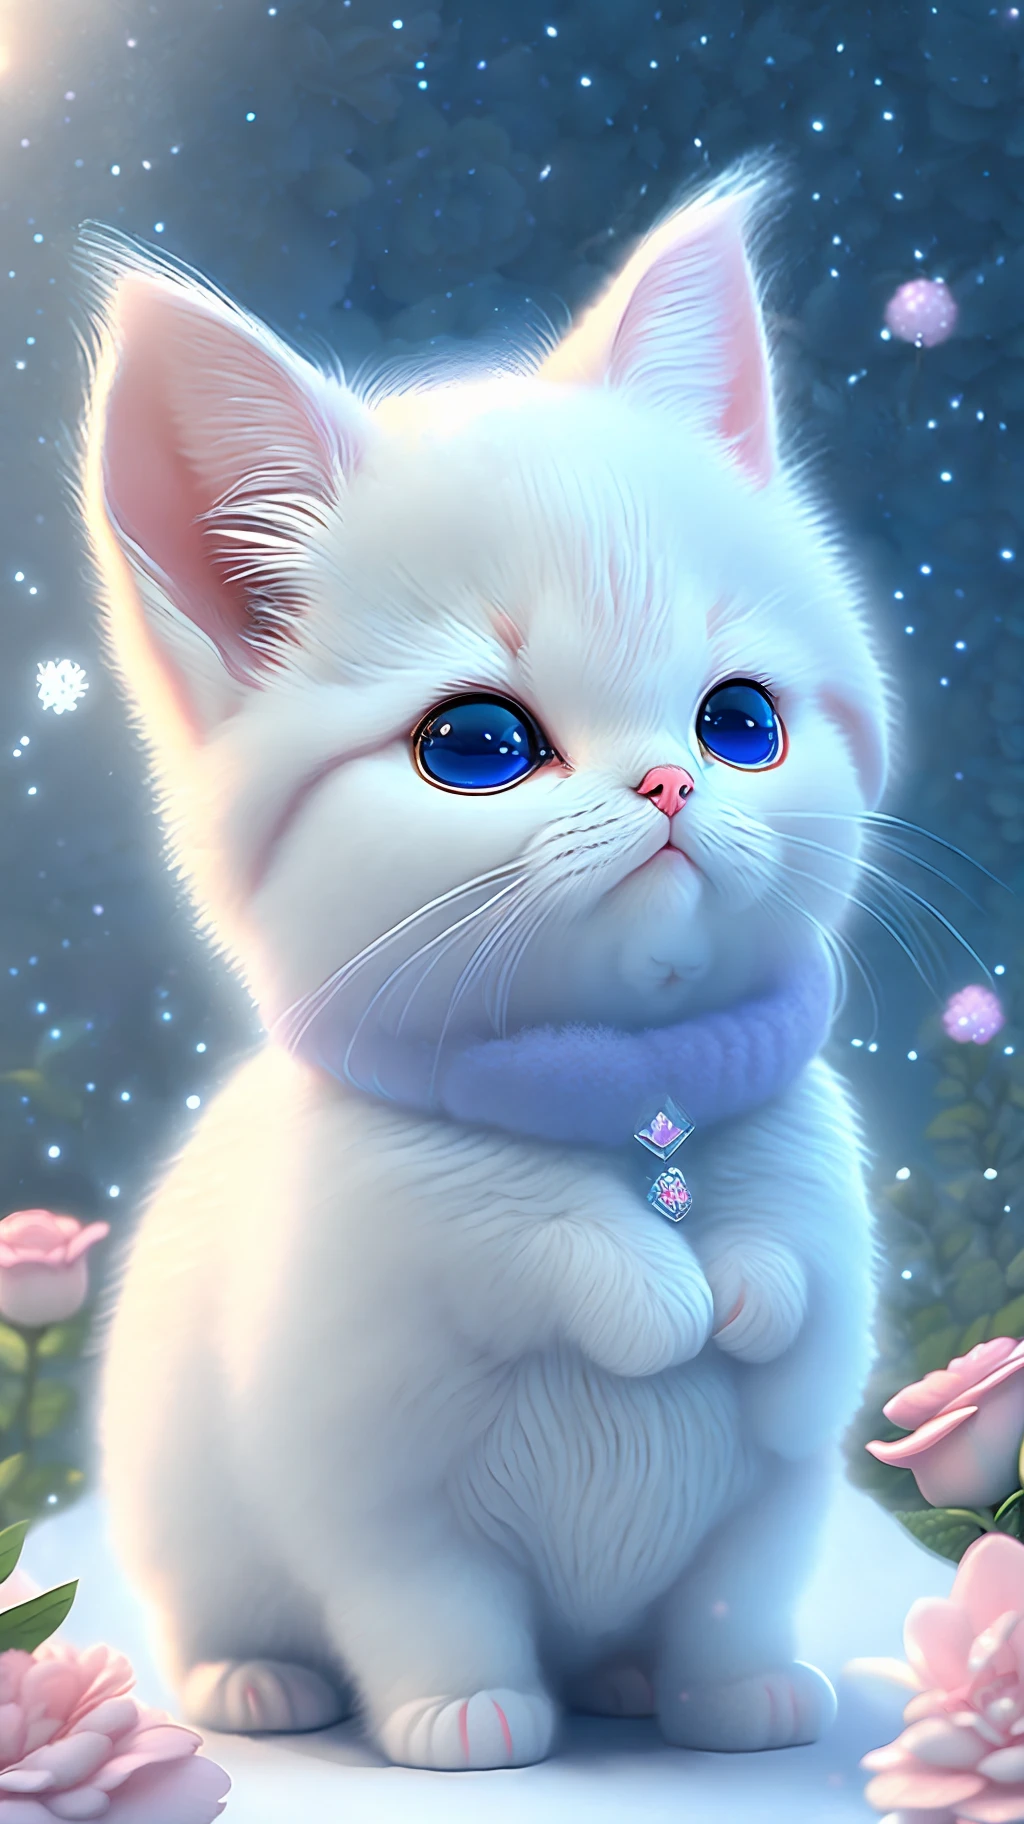 In this ultra-detailed CG art, cute kittens surrounded by ethereal roses, laughter, best quality, high resolution, intricate details, fantasy, cute animals, purple, funny, open mouth, laugh!!